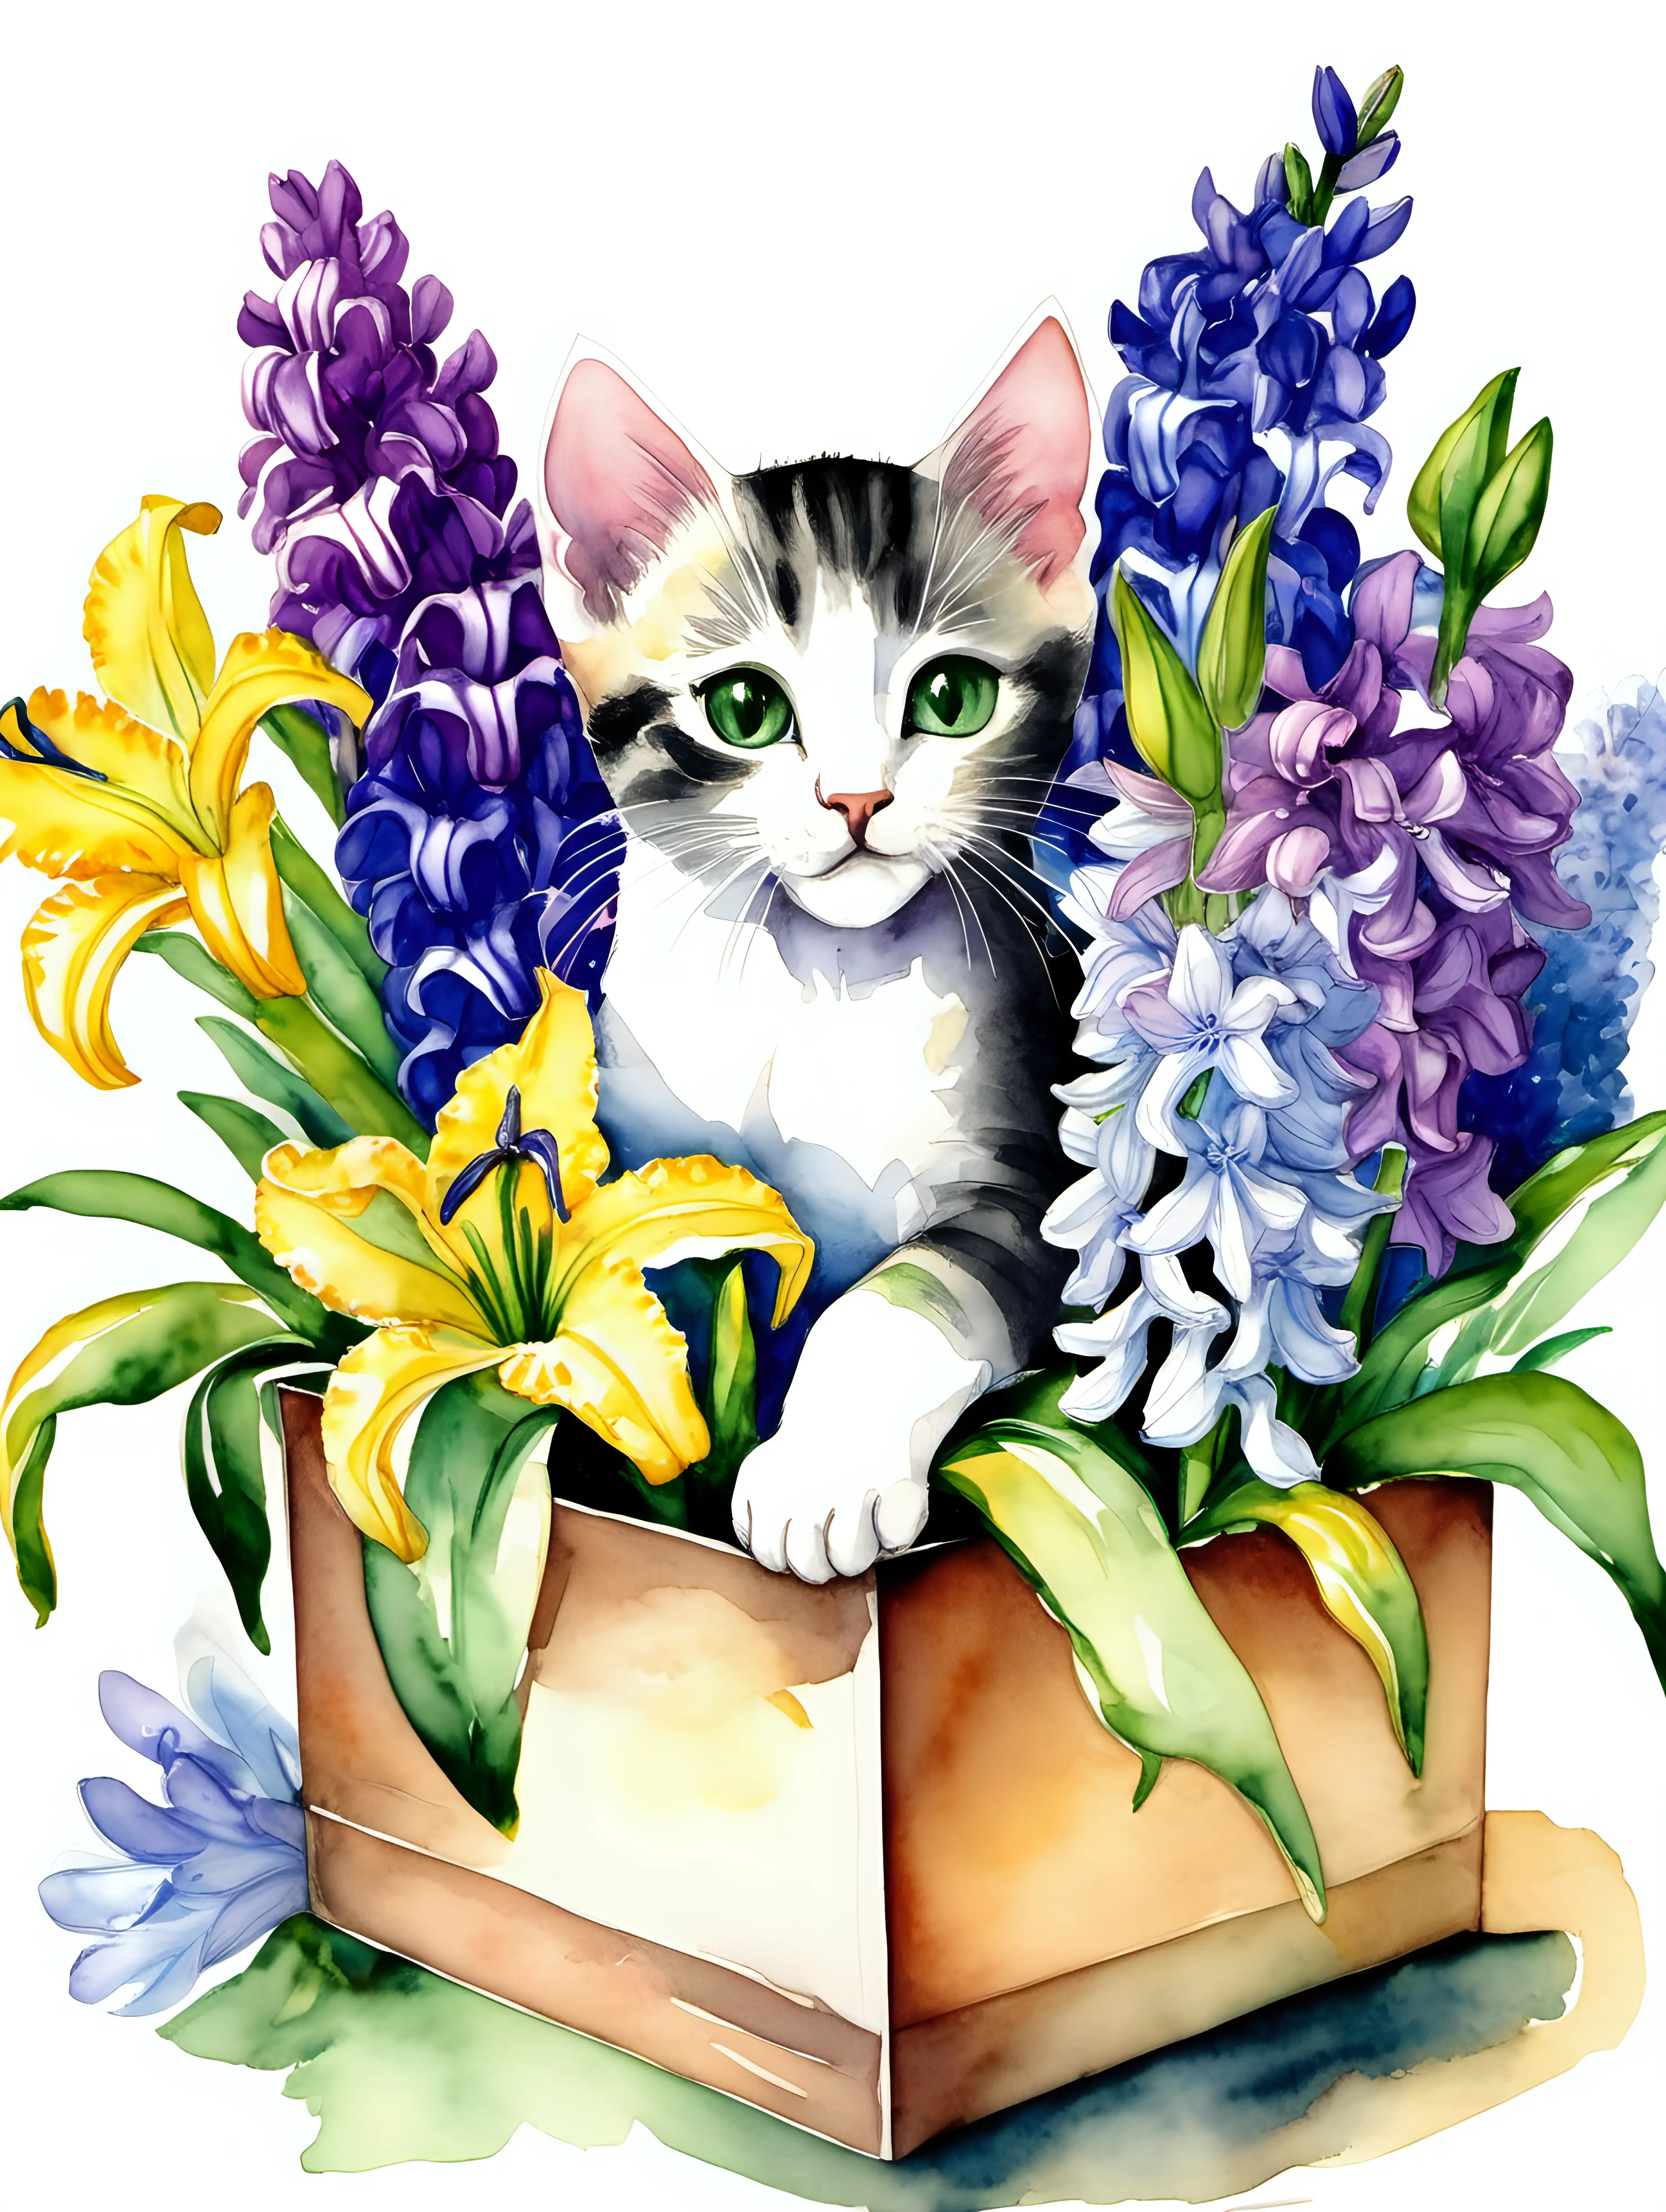 Create a festive atmosphere with a kitten in a box adorned with the colors of spring, including hyacinths, irises, and lilies. Use watercolors to convey the lively and celebratory nature.